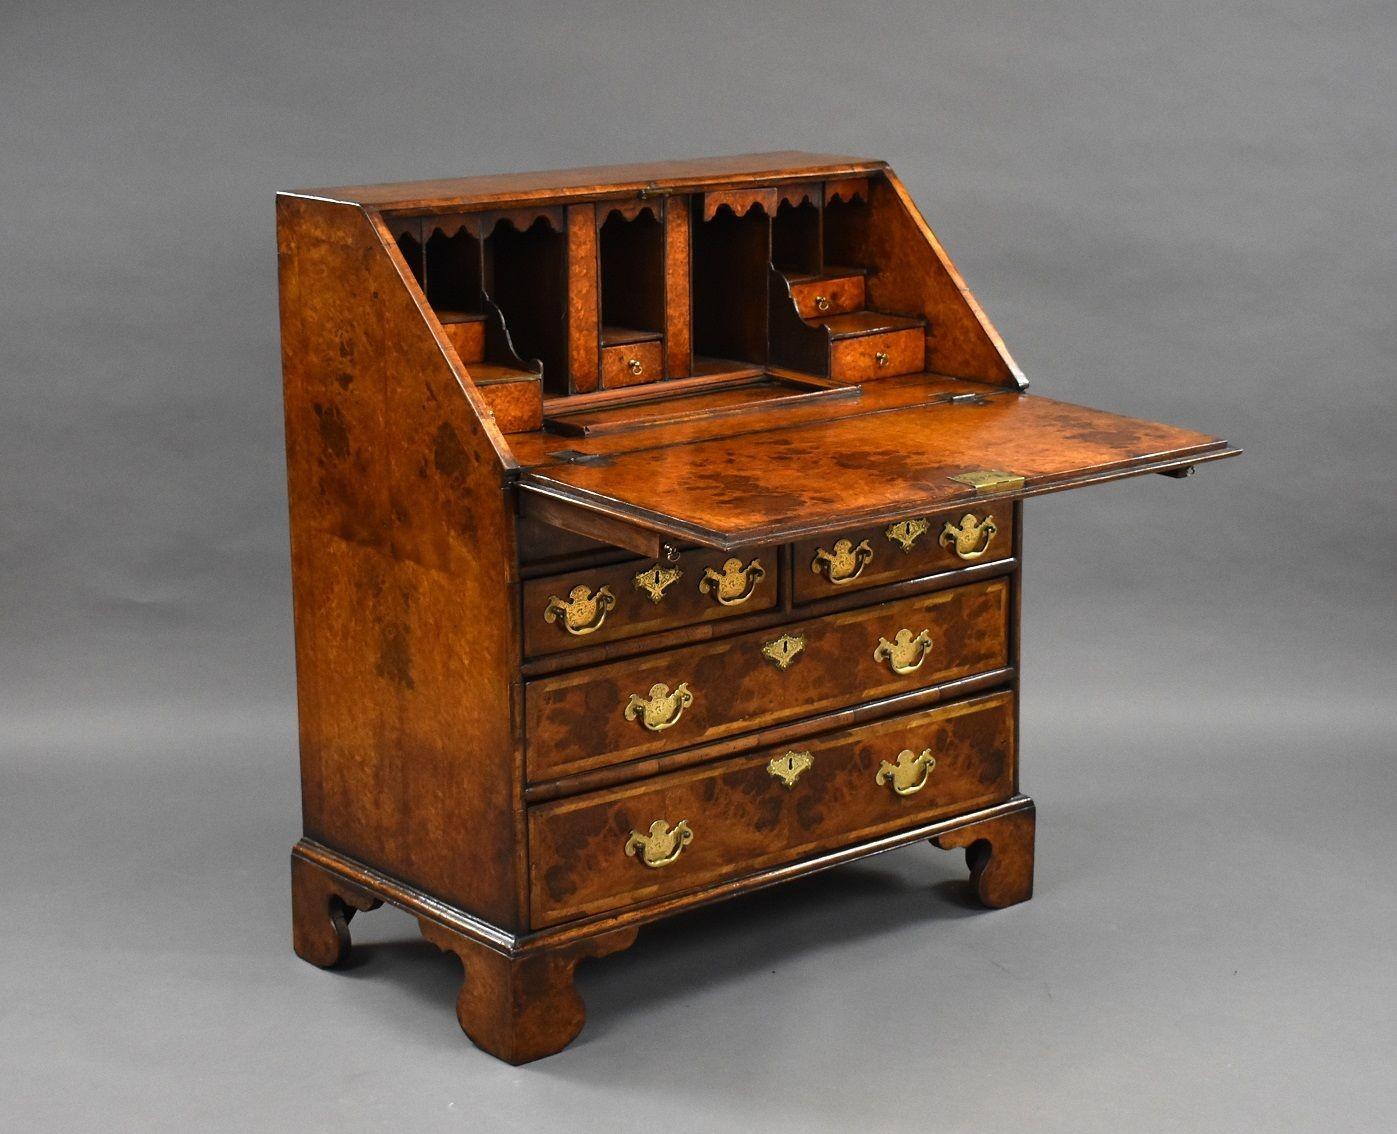 George II style walnut bureau with pull-down fall revealing pigeon holes and small drawers, also pull out bookends with a separate slide below for storage. Below the top it has two small drawers and two long drawers with brass handles stands on